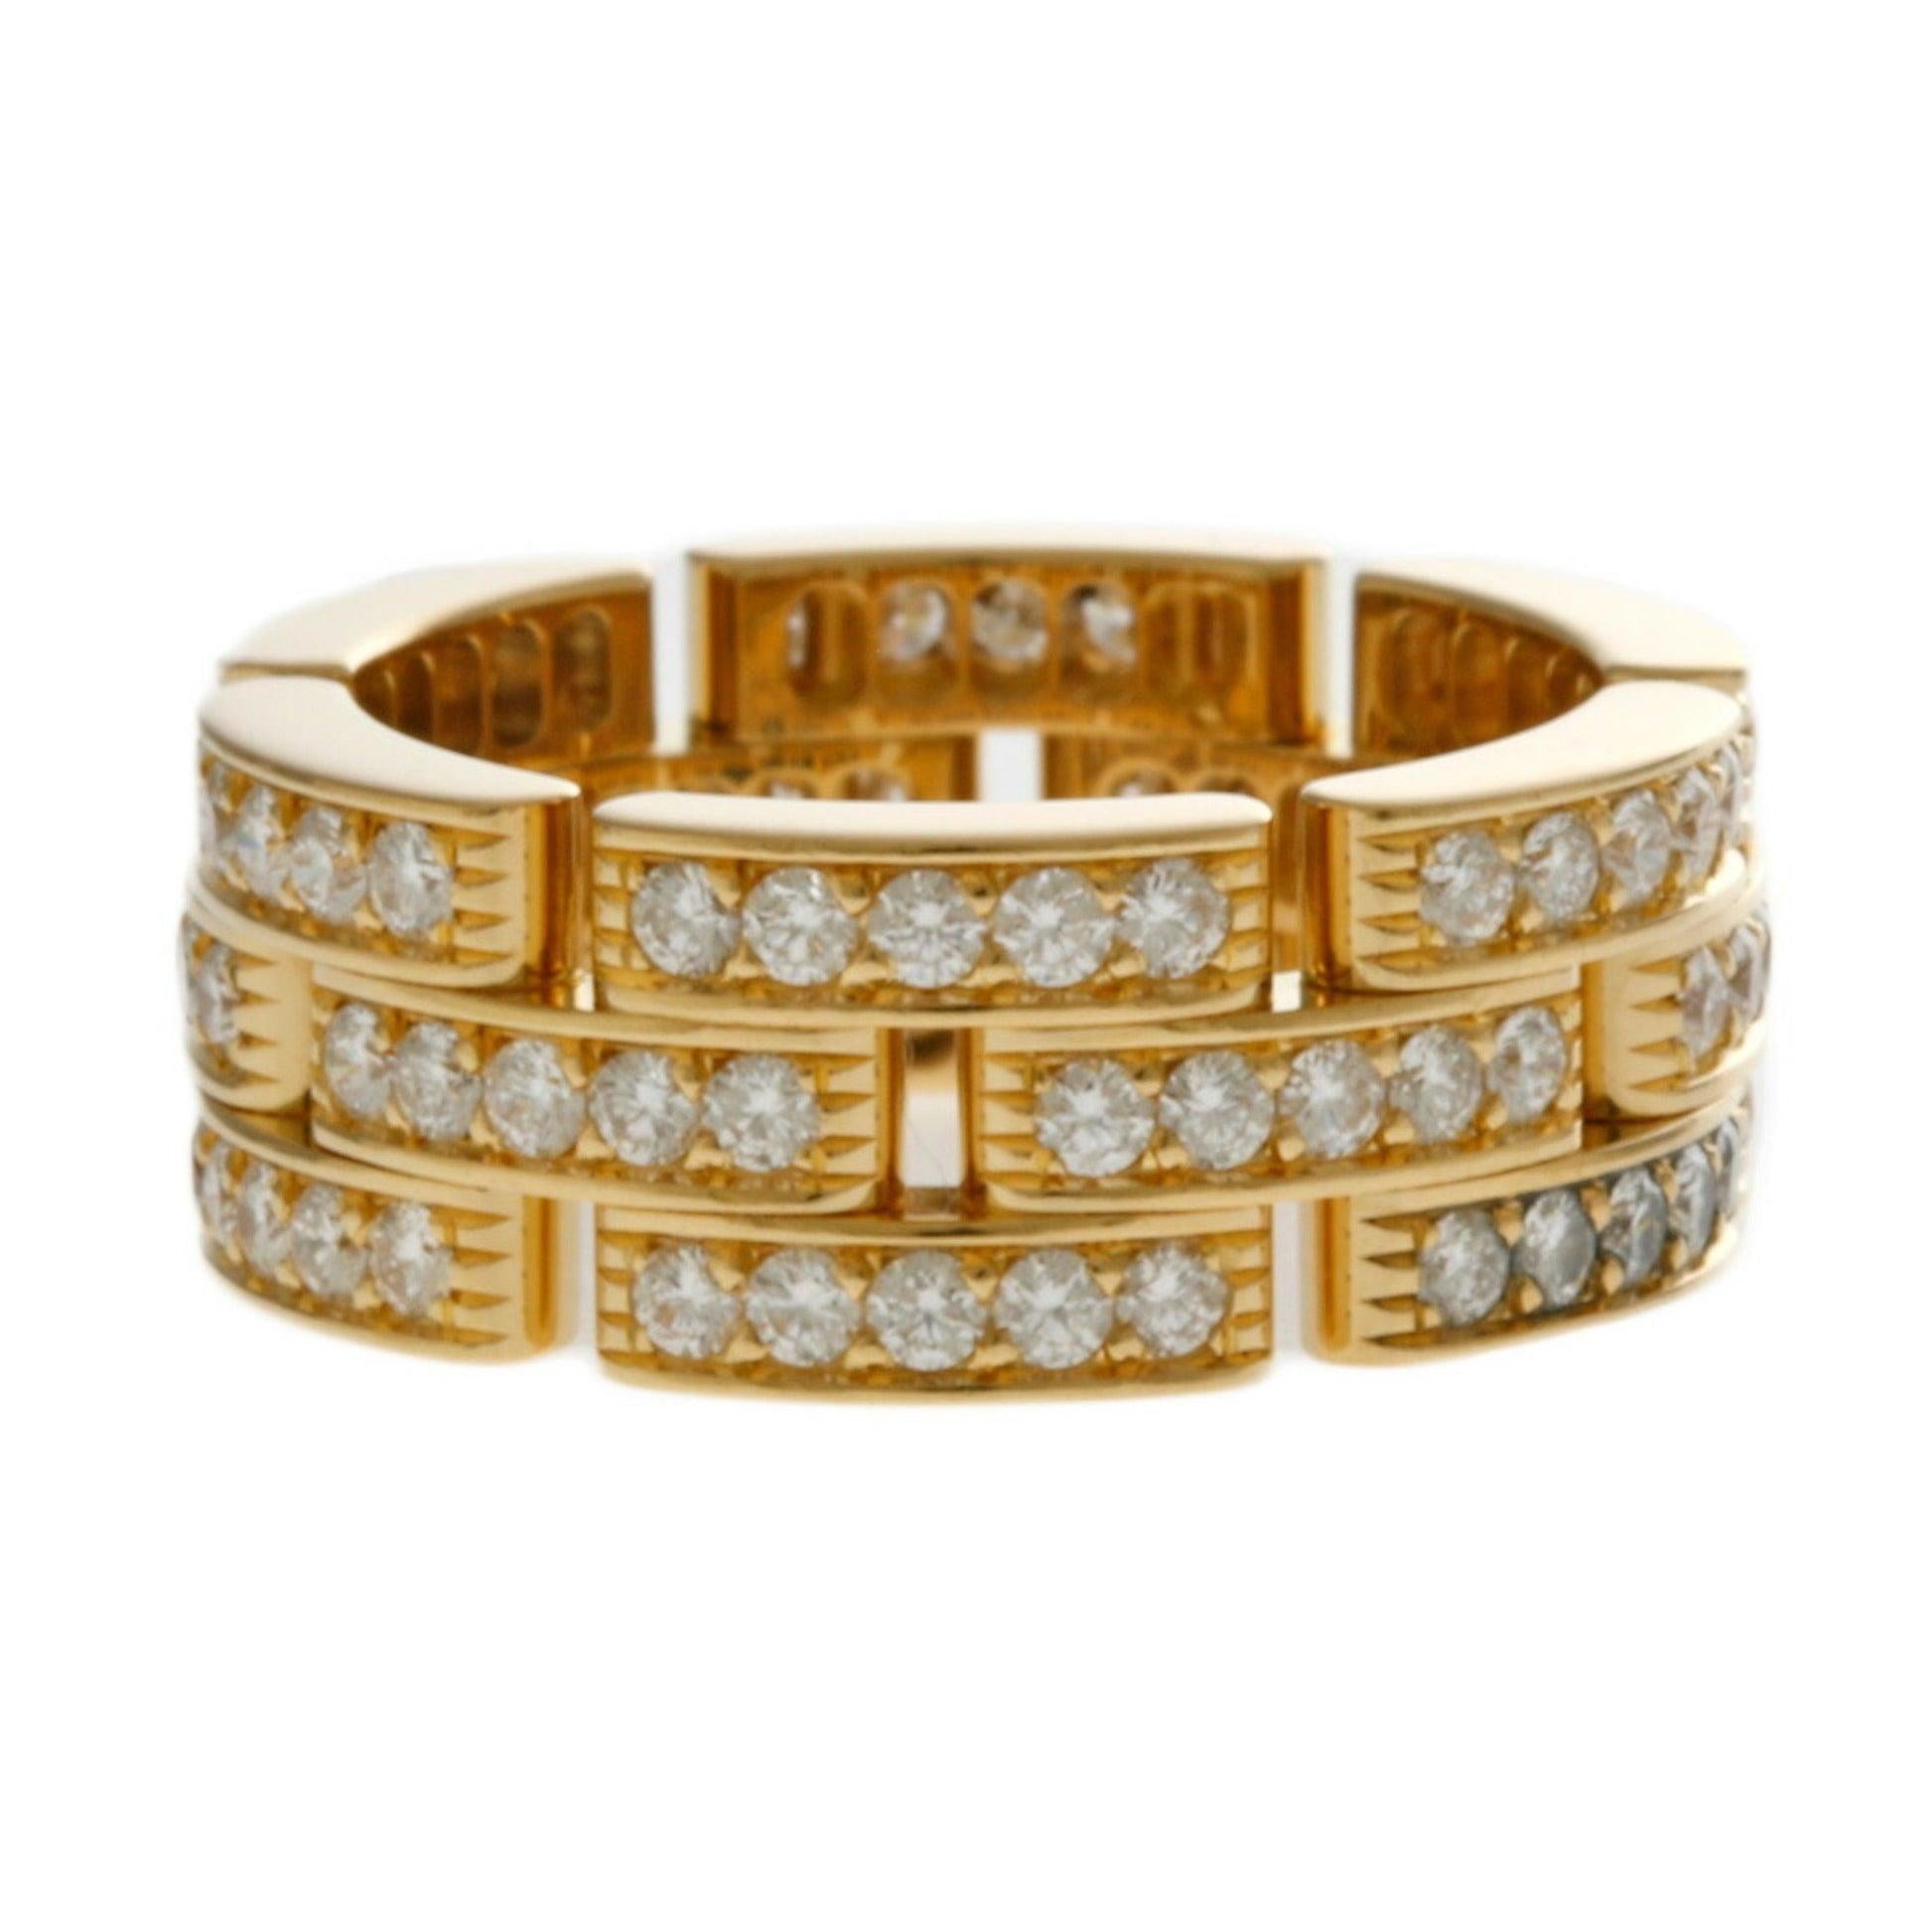 Women's Cartier Mailon Panthere Diamond Ring in 18K Yellow Gold For Sale